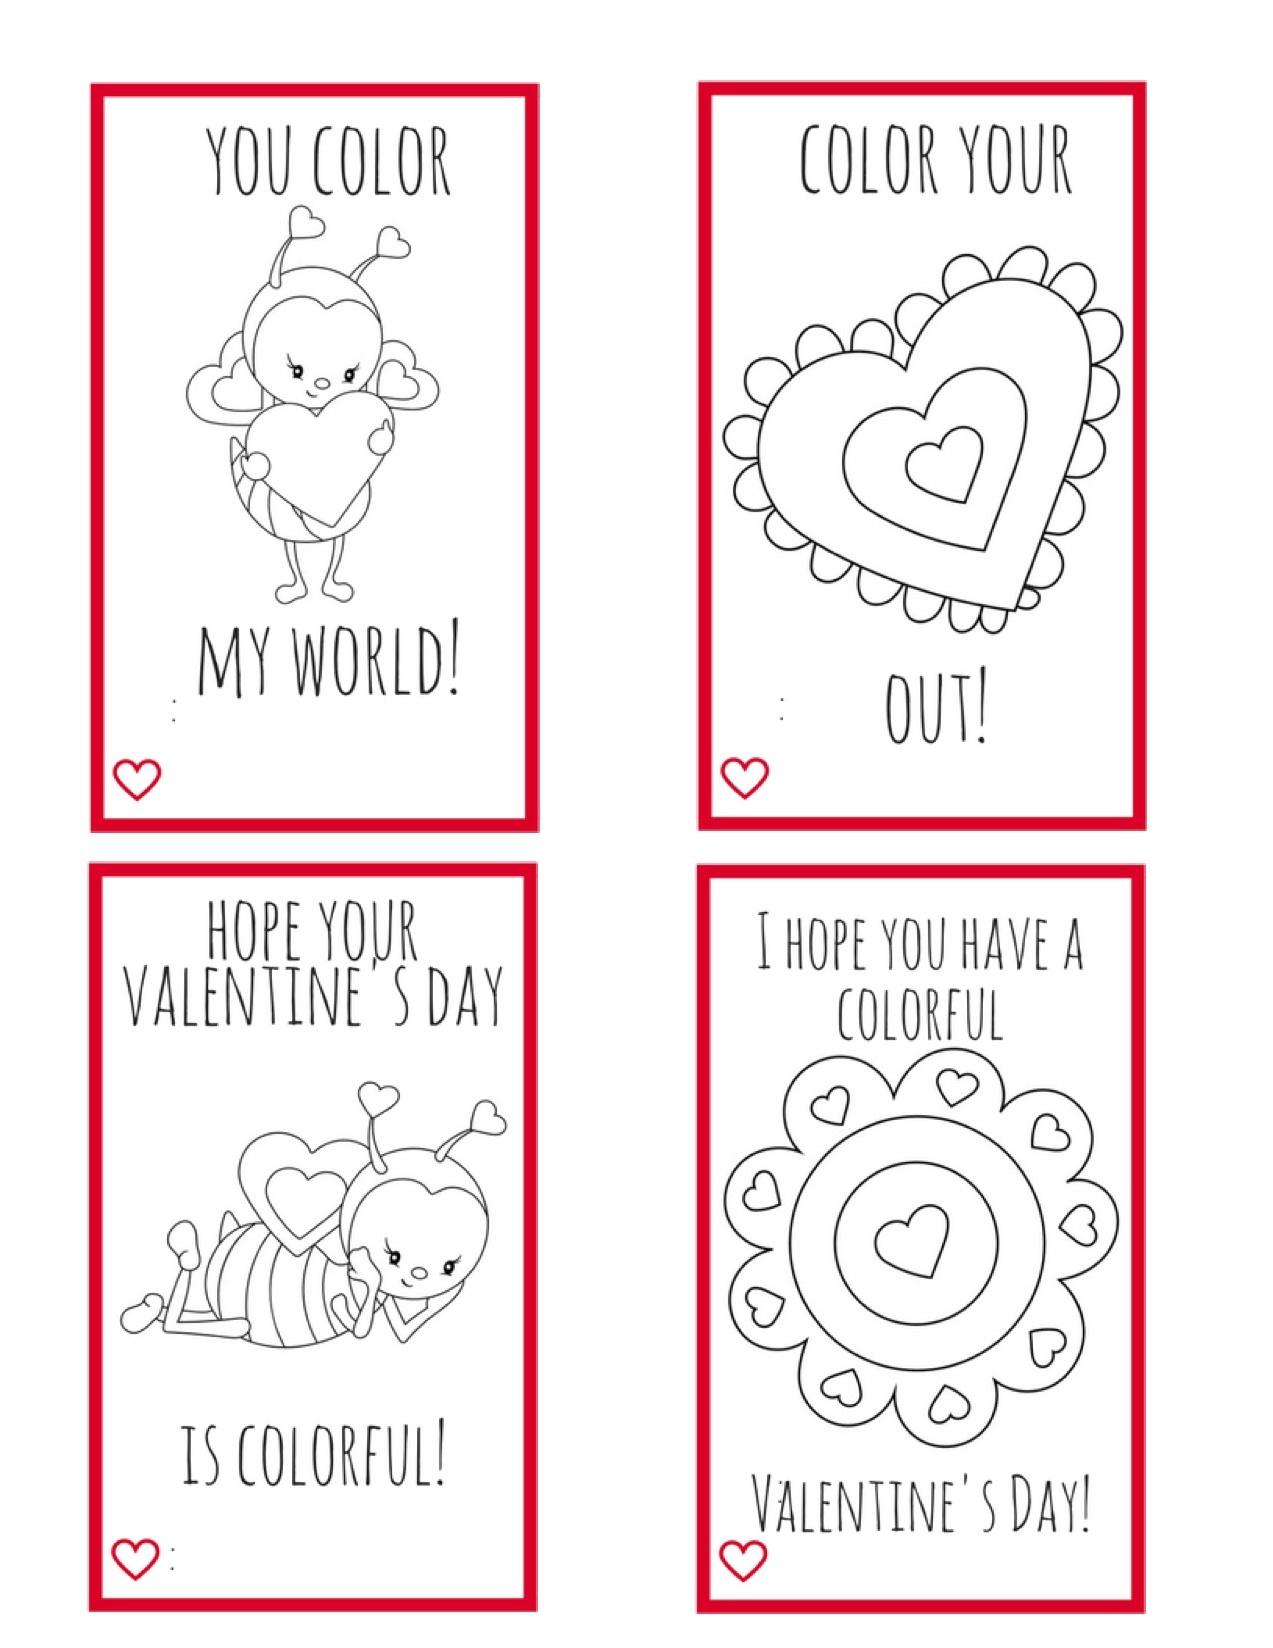 Printable Valentine Cards For Kids--Perfect For Kids To Make For - Free Printable Color Your Own Cards